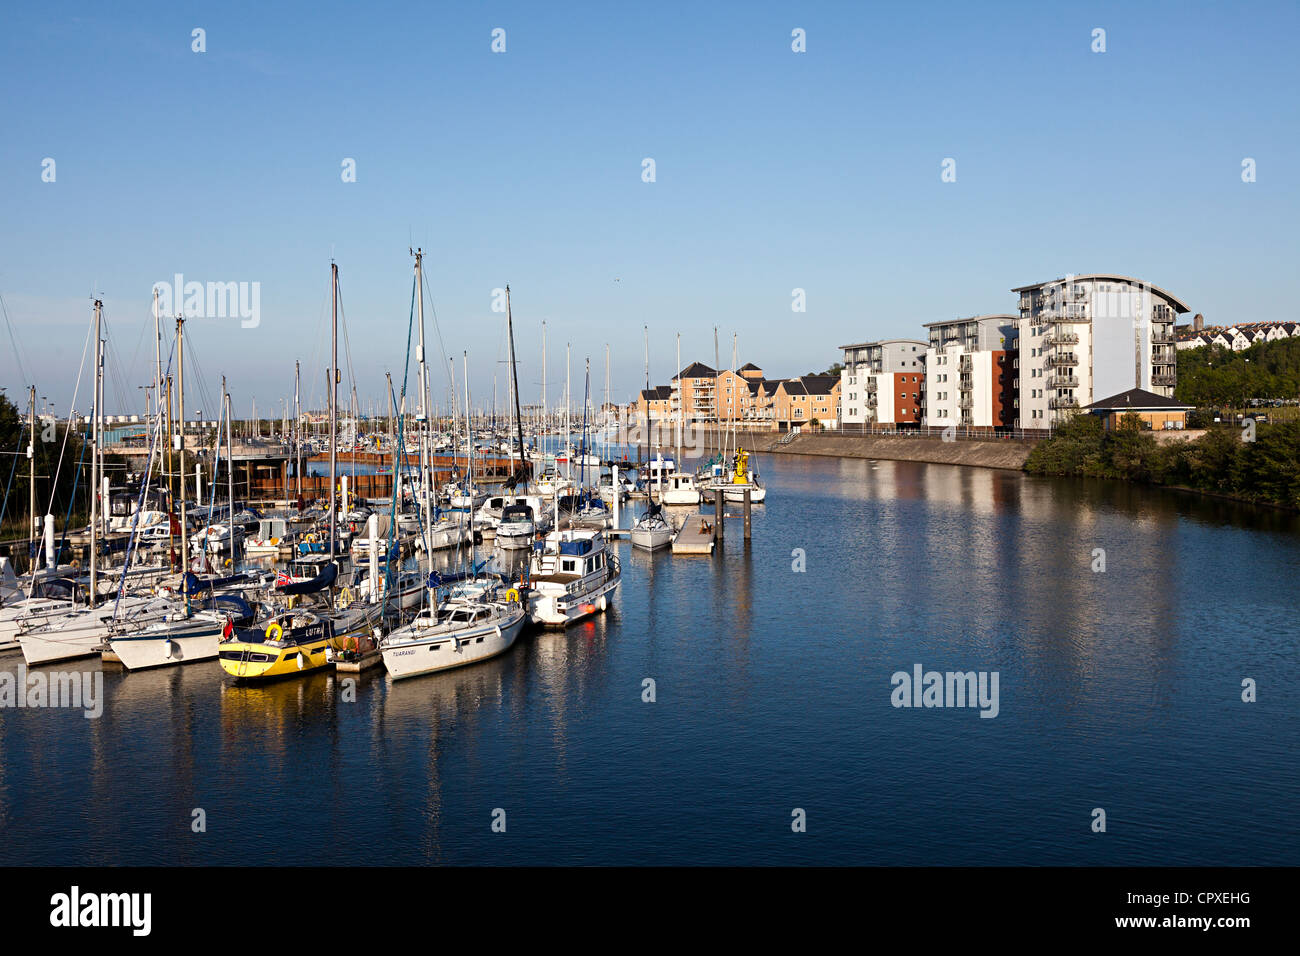 Boats moored in Cardiff Bay, Wales, UK Stock Photo